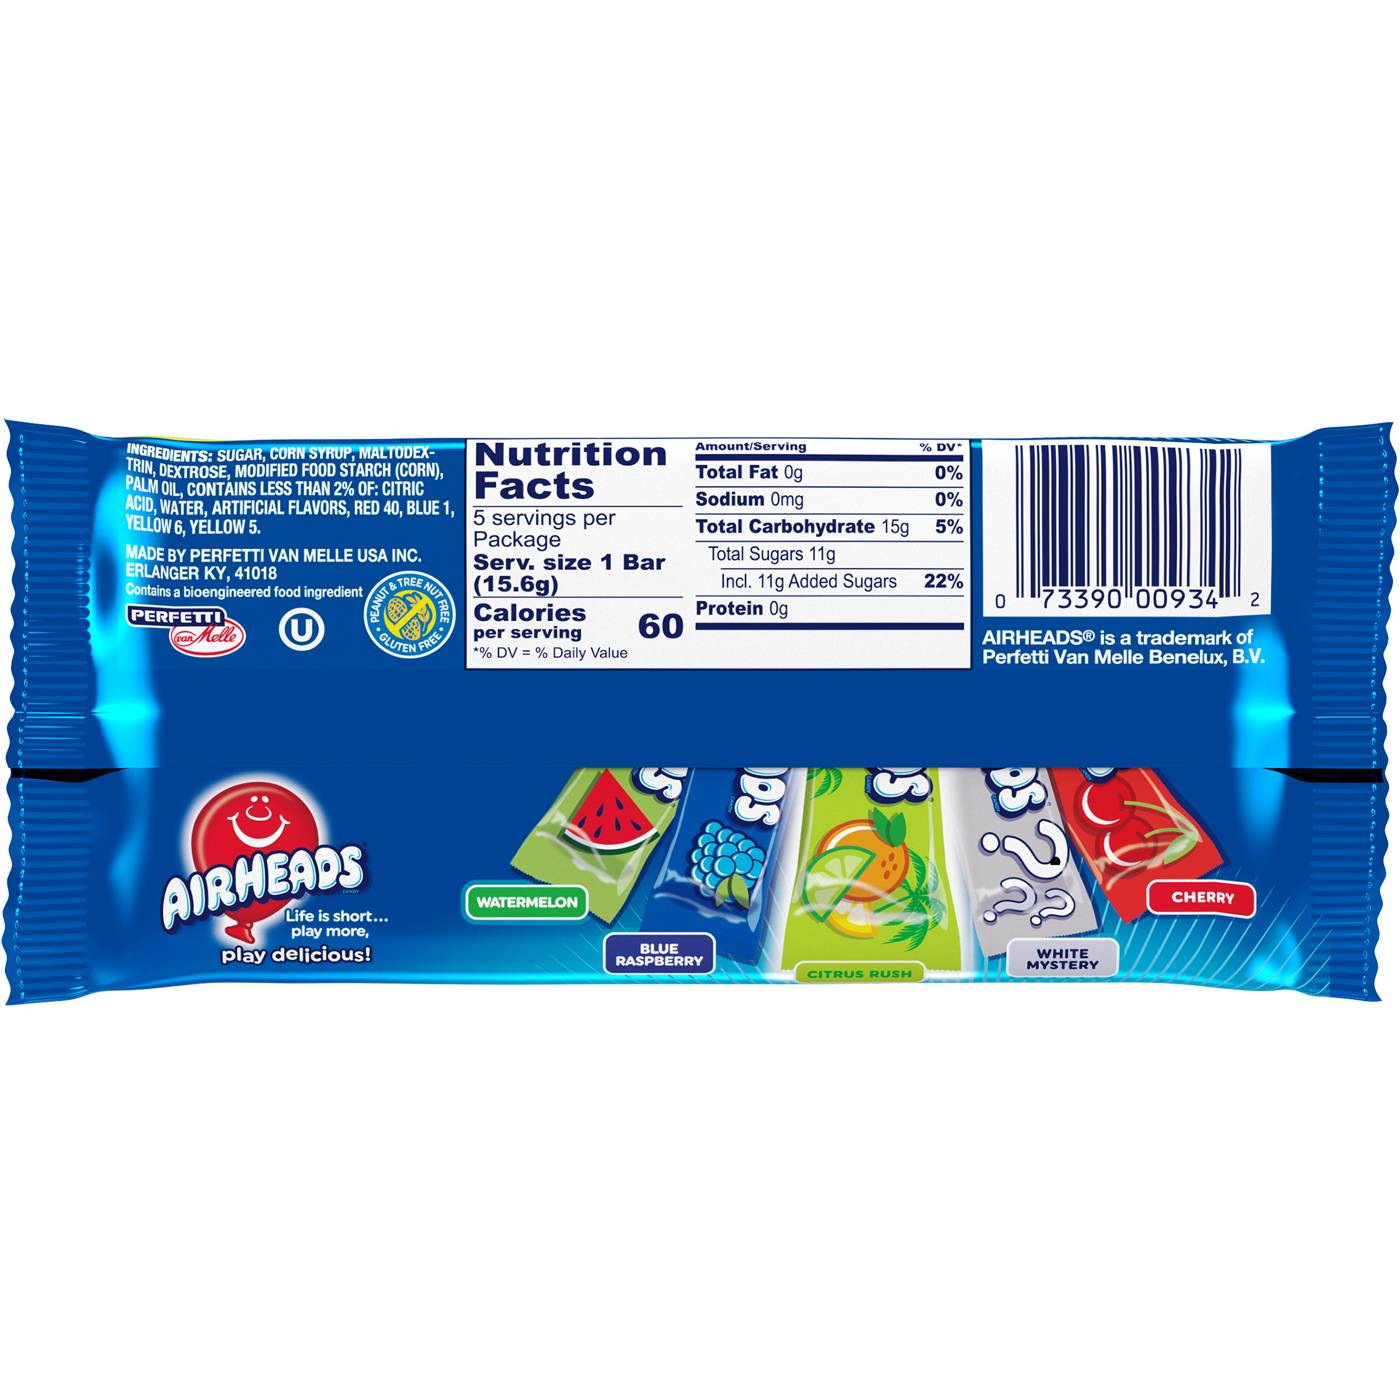 Airheads Full Size 5 Bars Pack; image 2 of 2